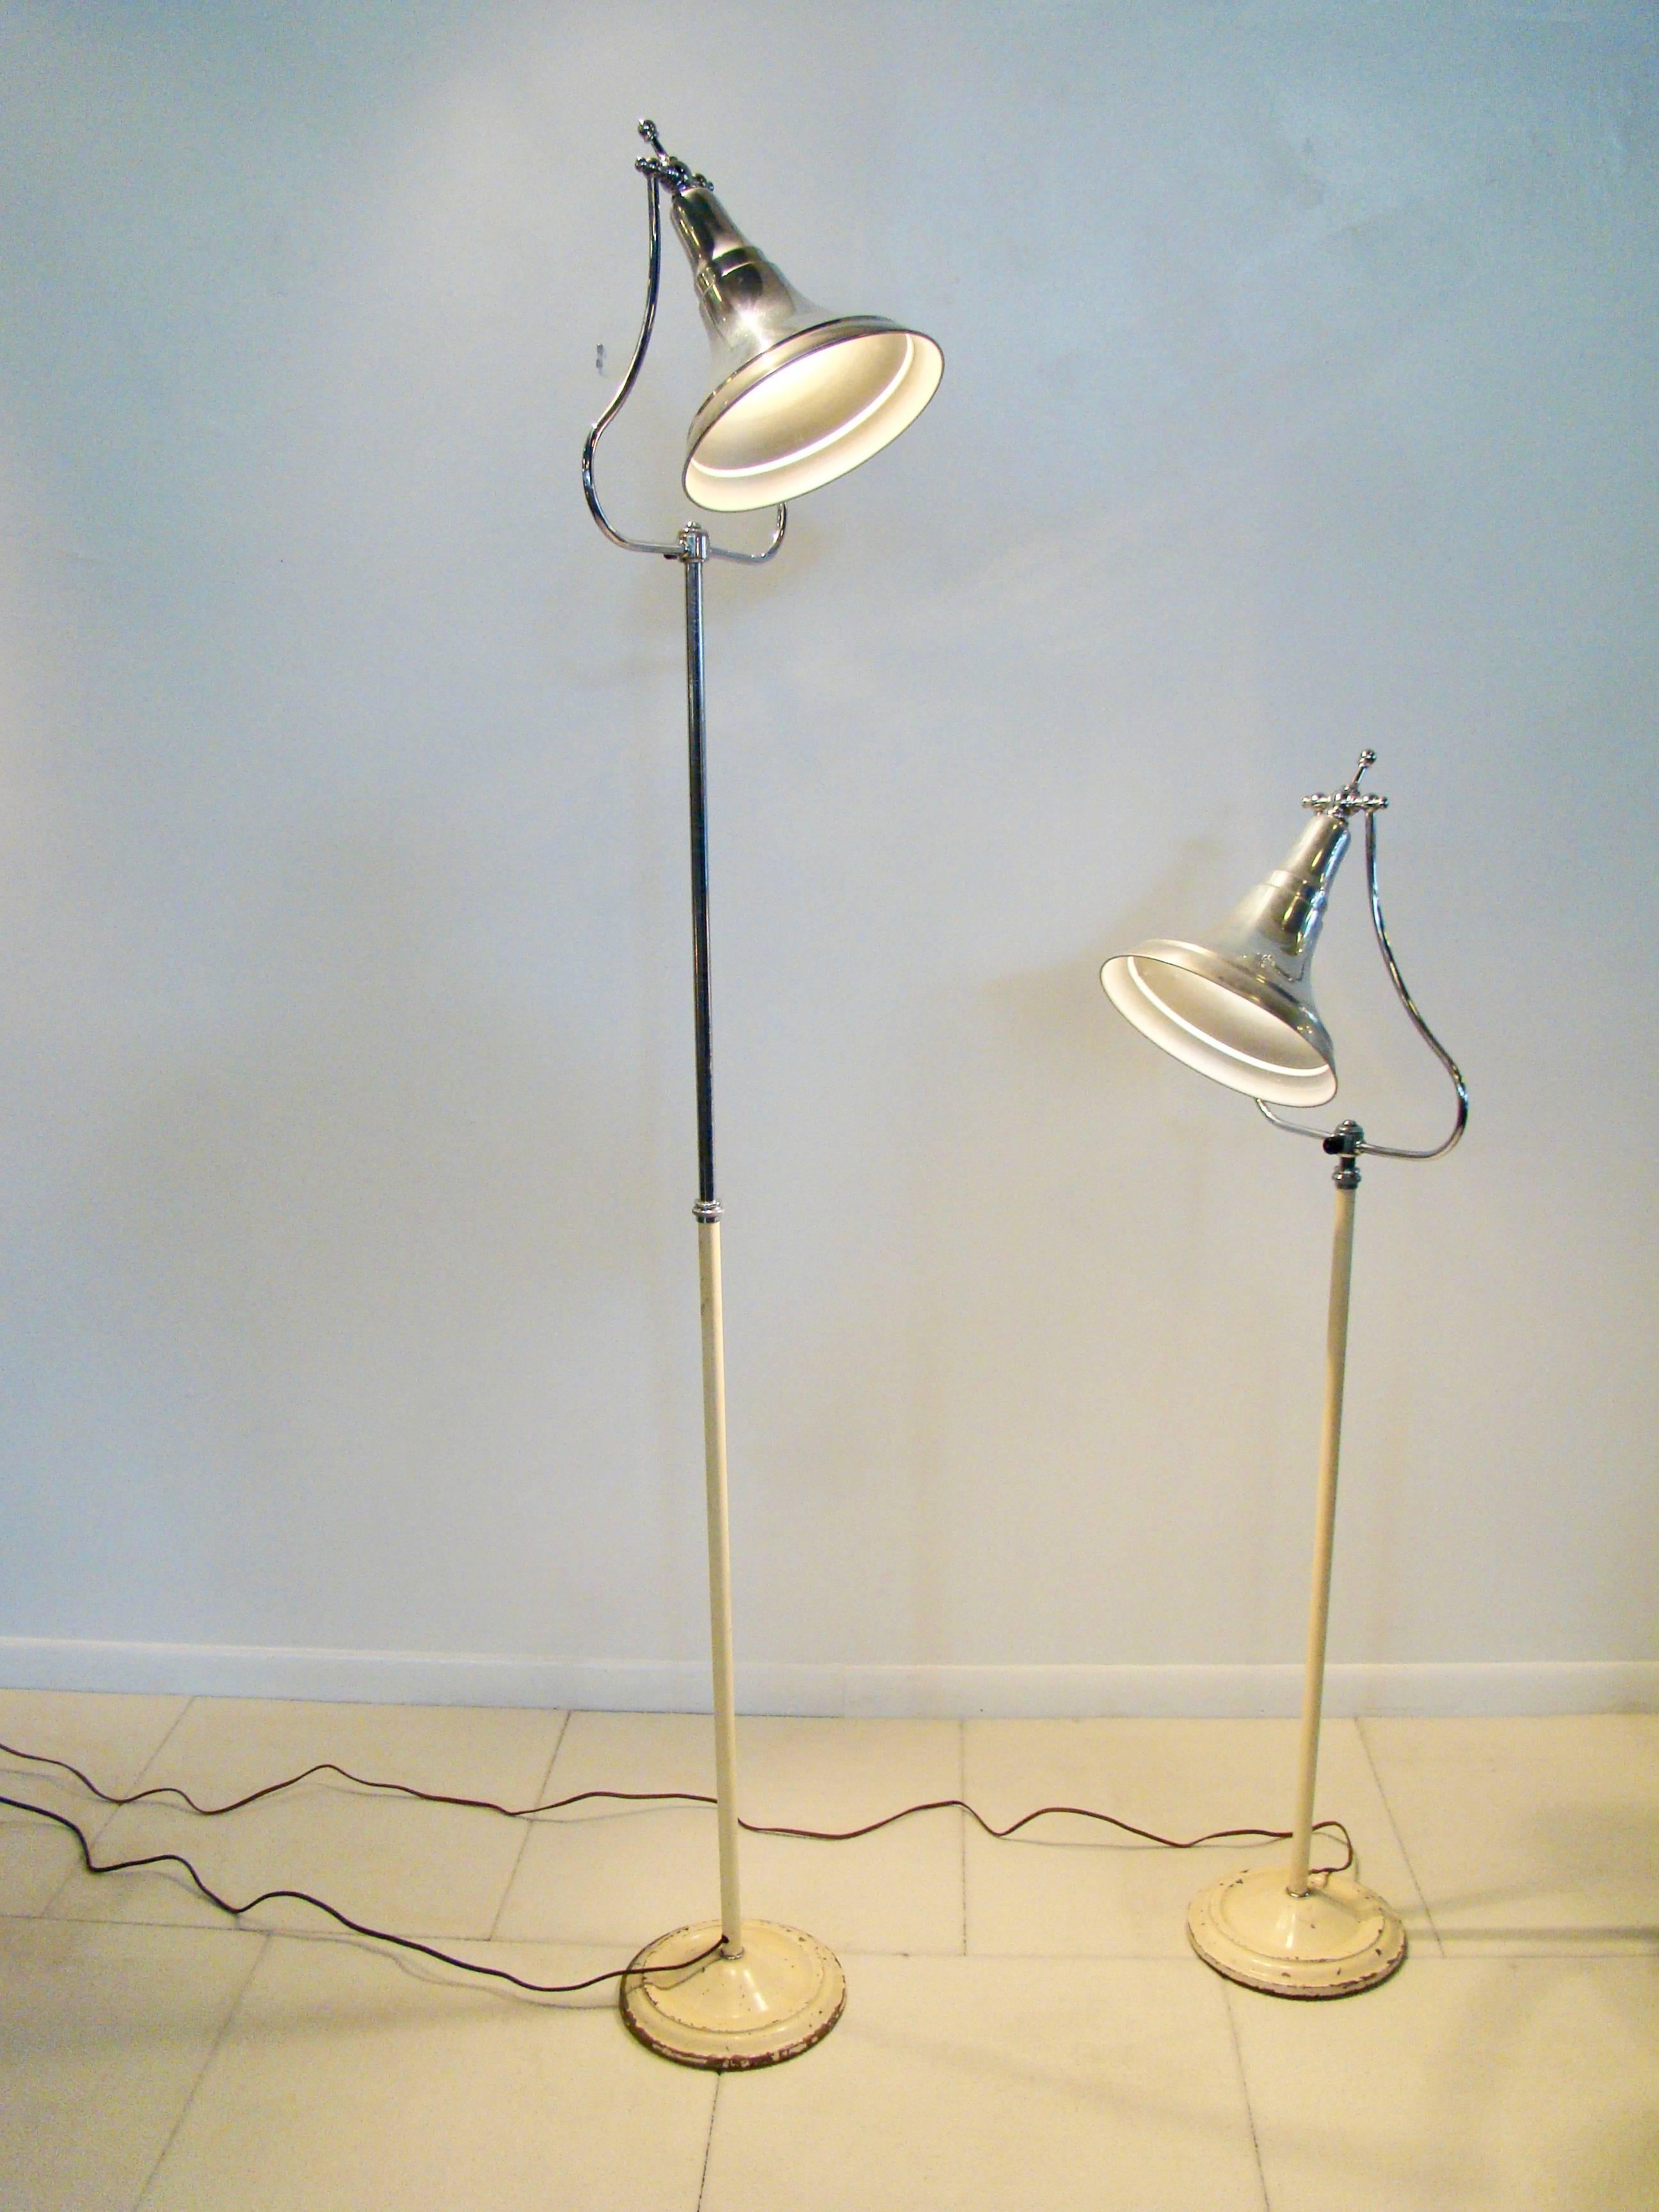 Machine Age Industrial medical bell shaped floor lamps. The bell is comprised of aluminium and chrome and tilts and adjusts up and down. The base is chrome and painted metal.